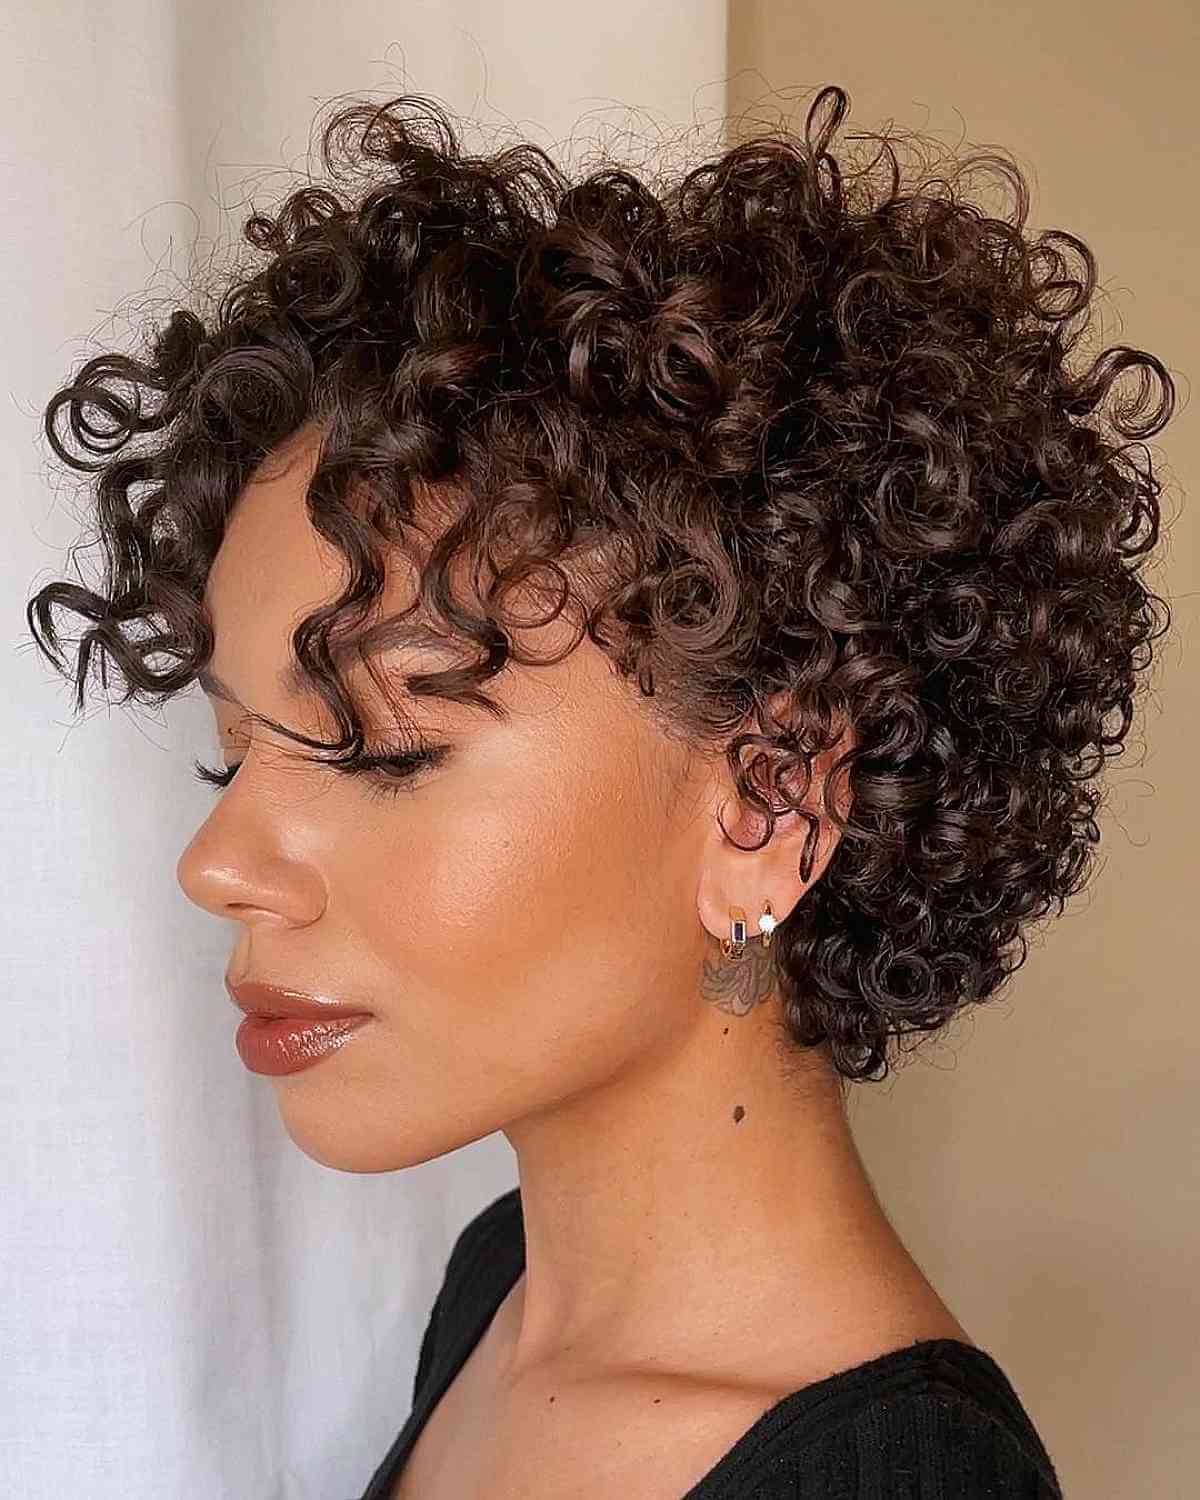 Prettiest pixie cut with curly bangs